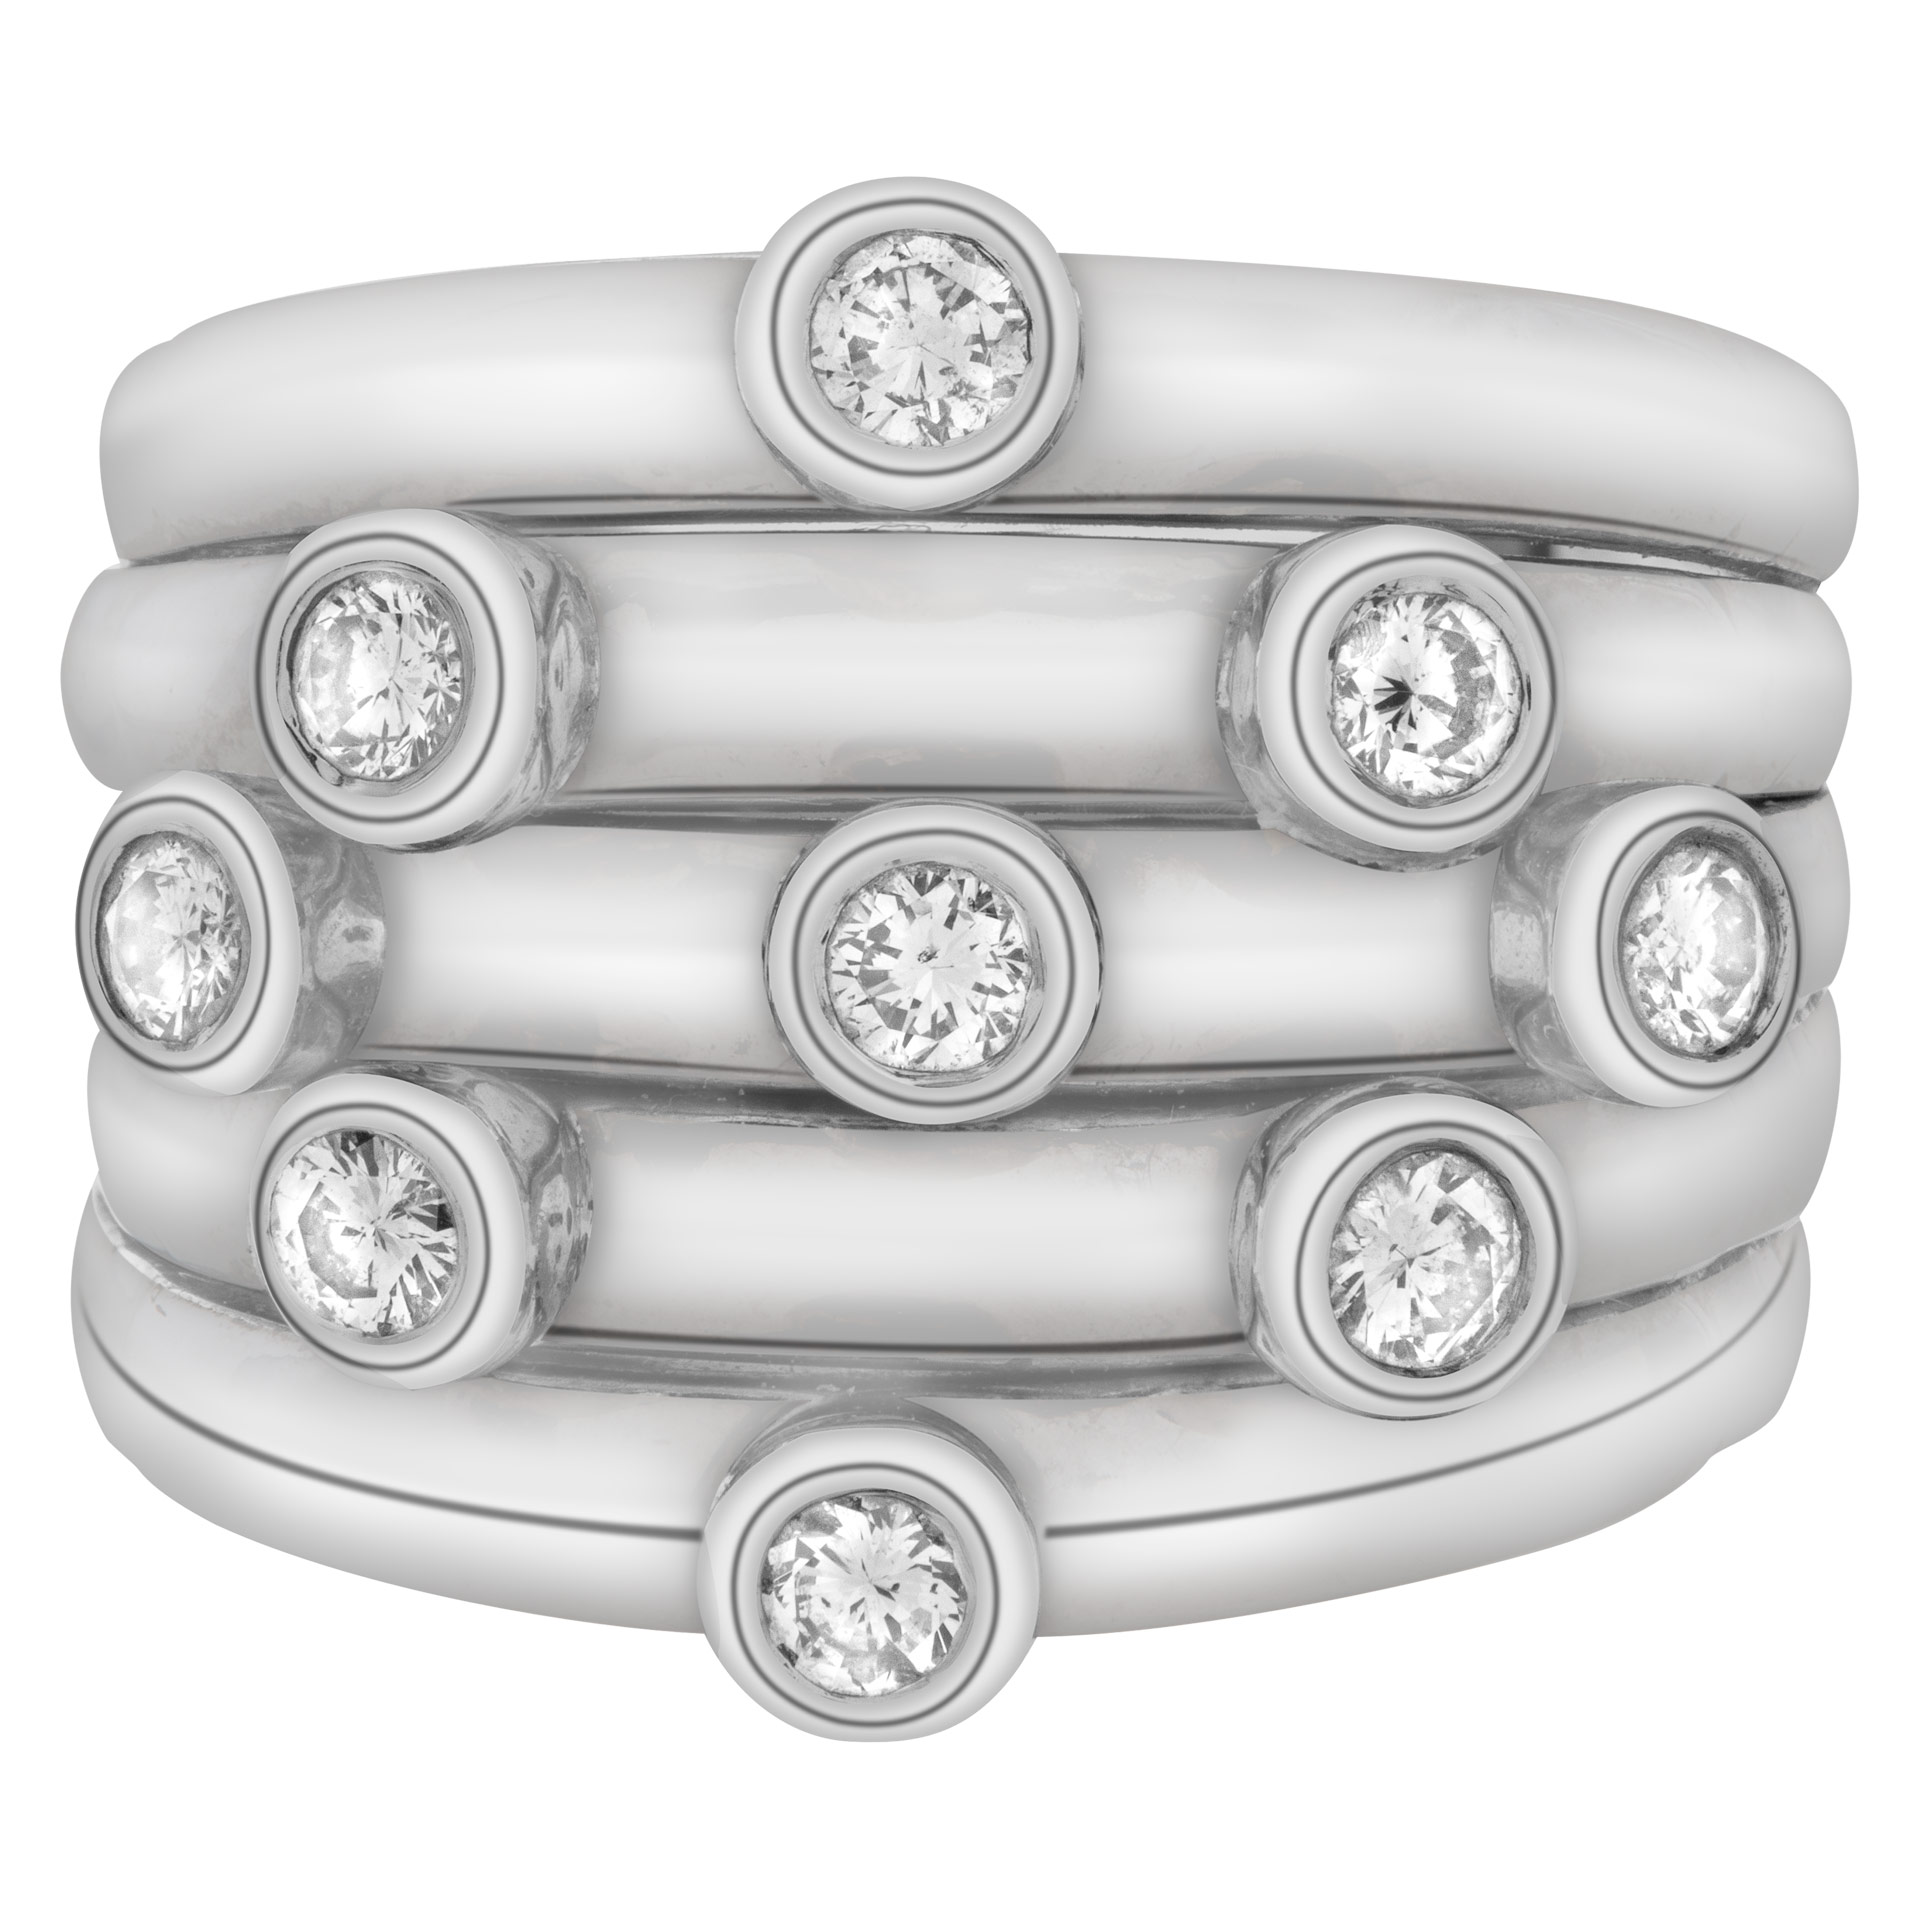 Wide diamonds ring set in 18k white gold. Round brilliant bezeled set diamonds total approx. weight: 1.00 carat image 2